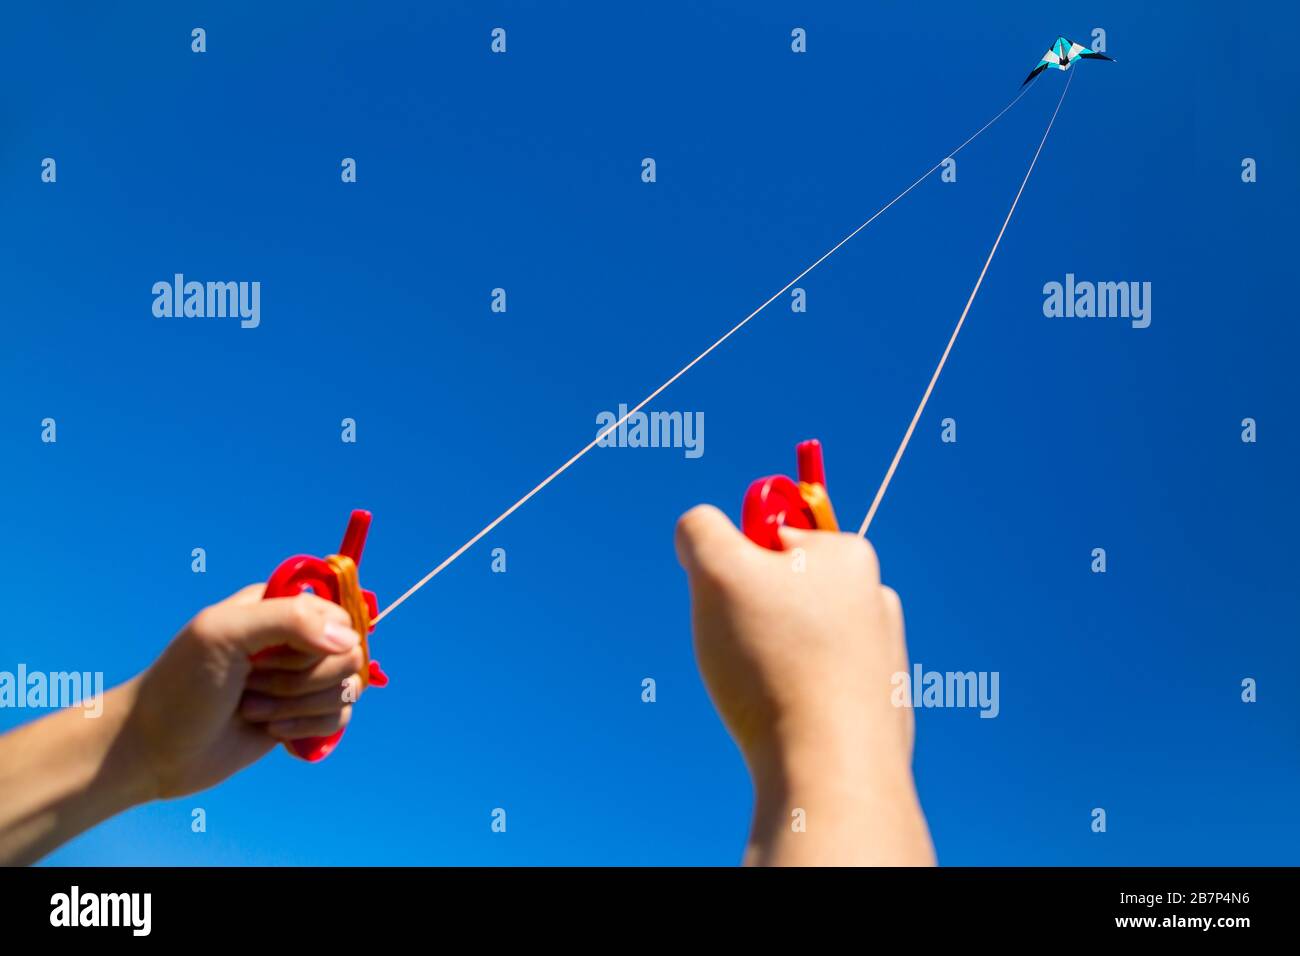 Two male hands holding kite strings with a kite  in sky at distance Stock Photo